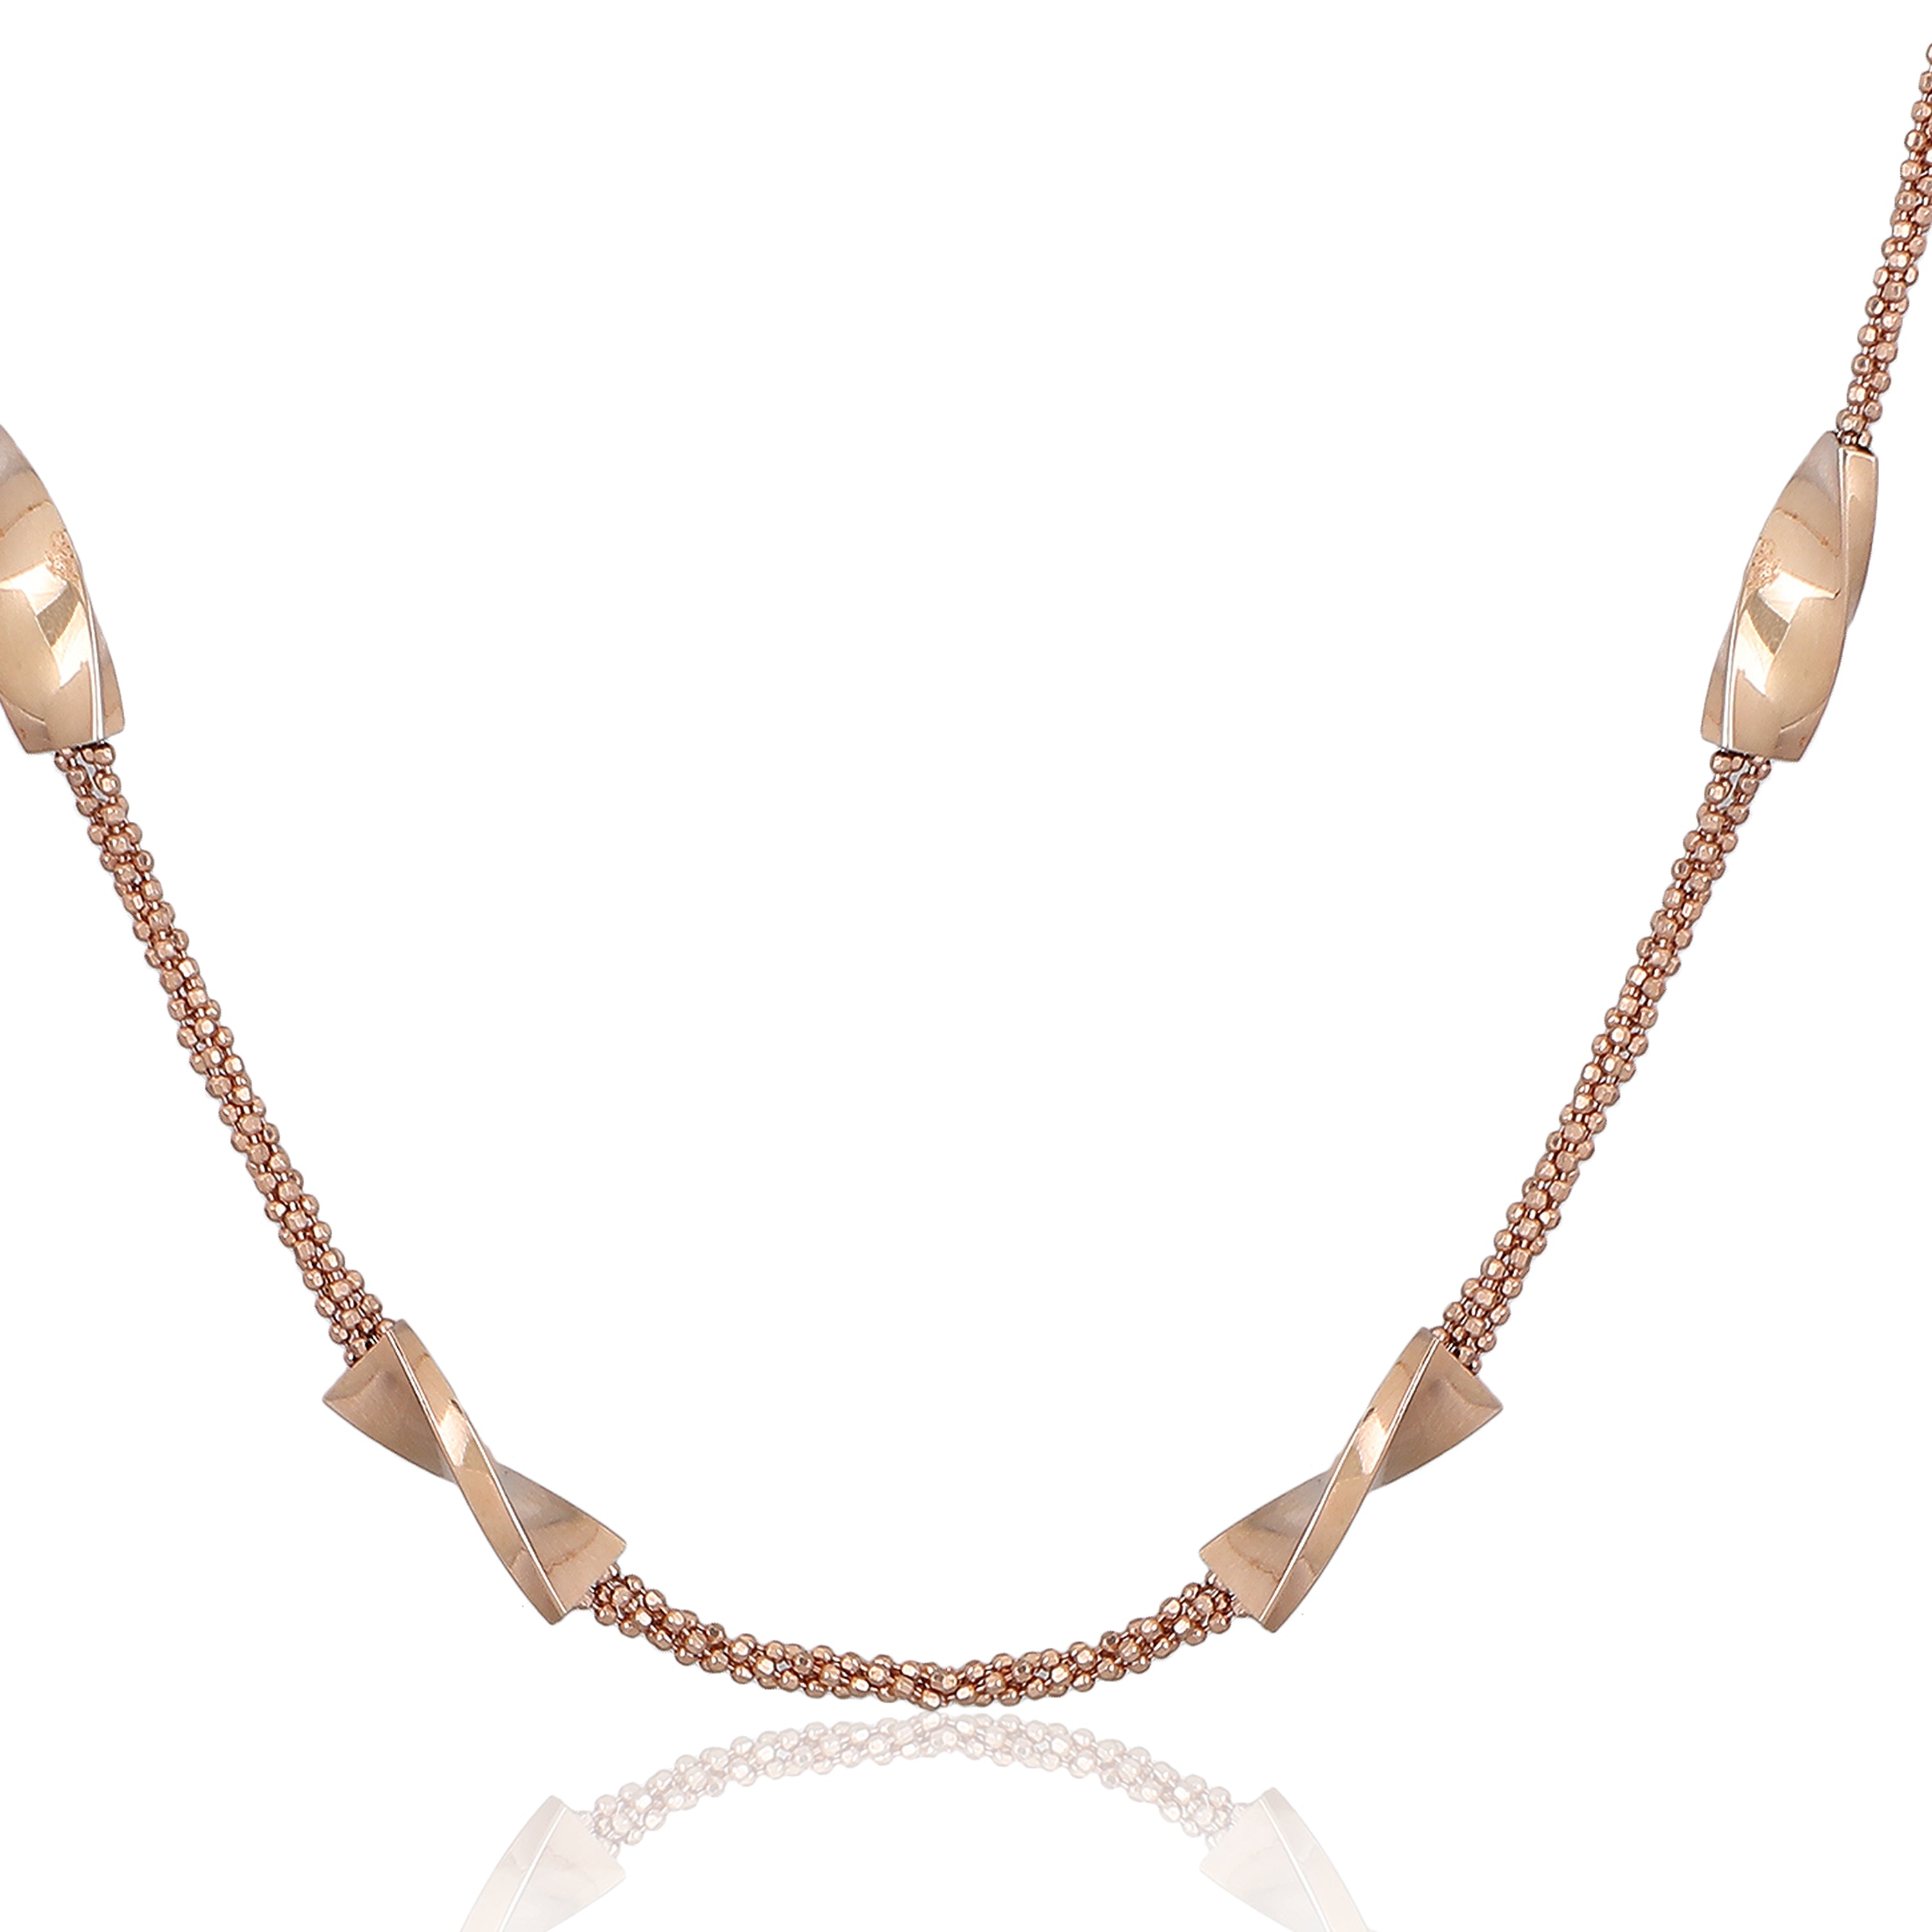 Twist and turns beads rose gold chain